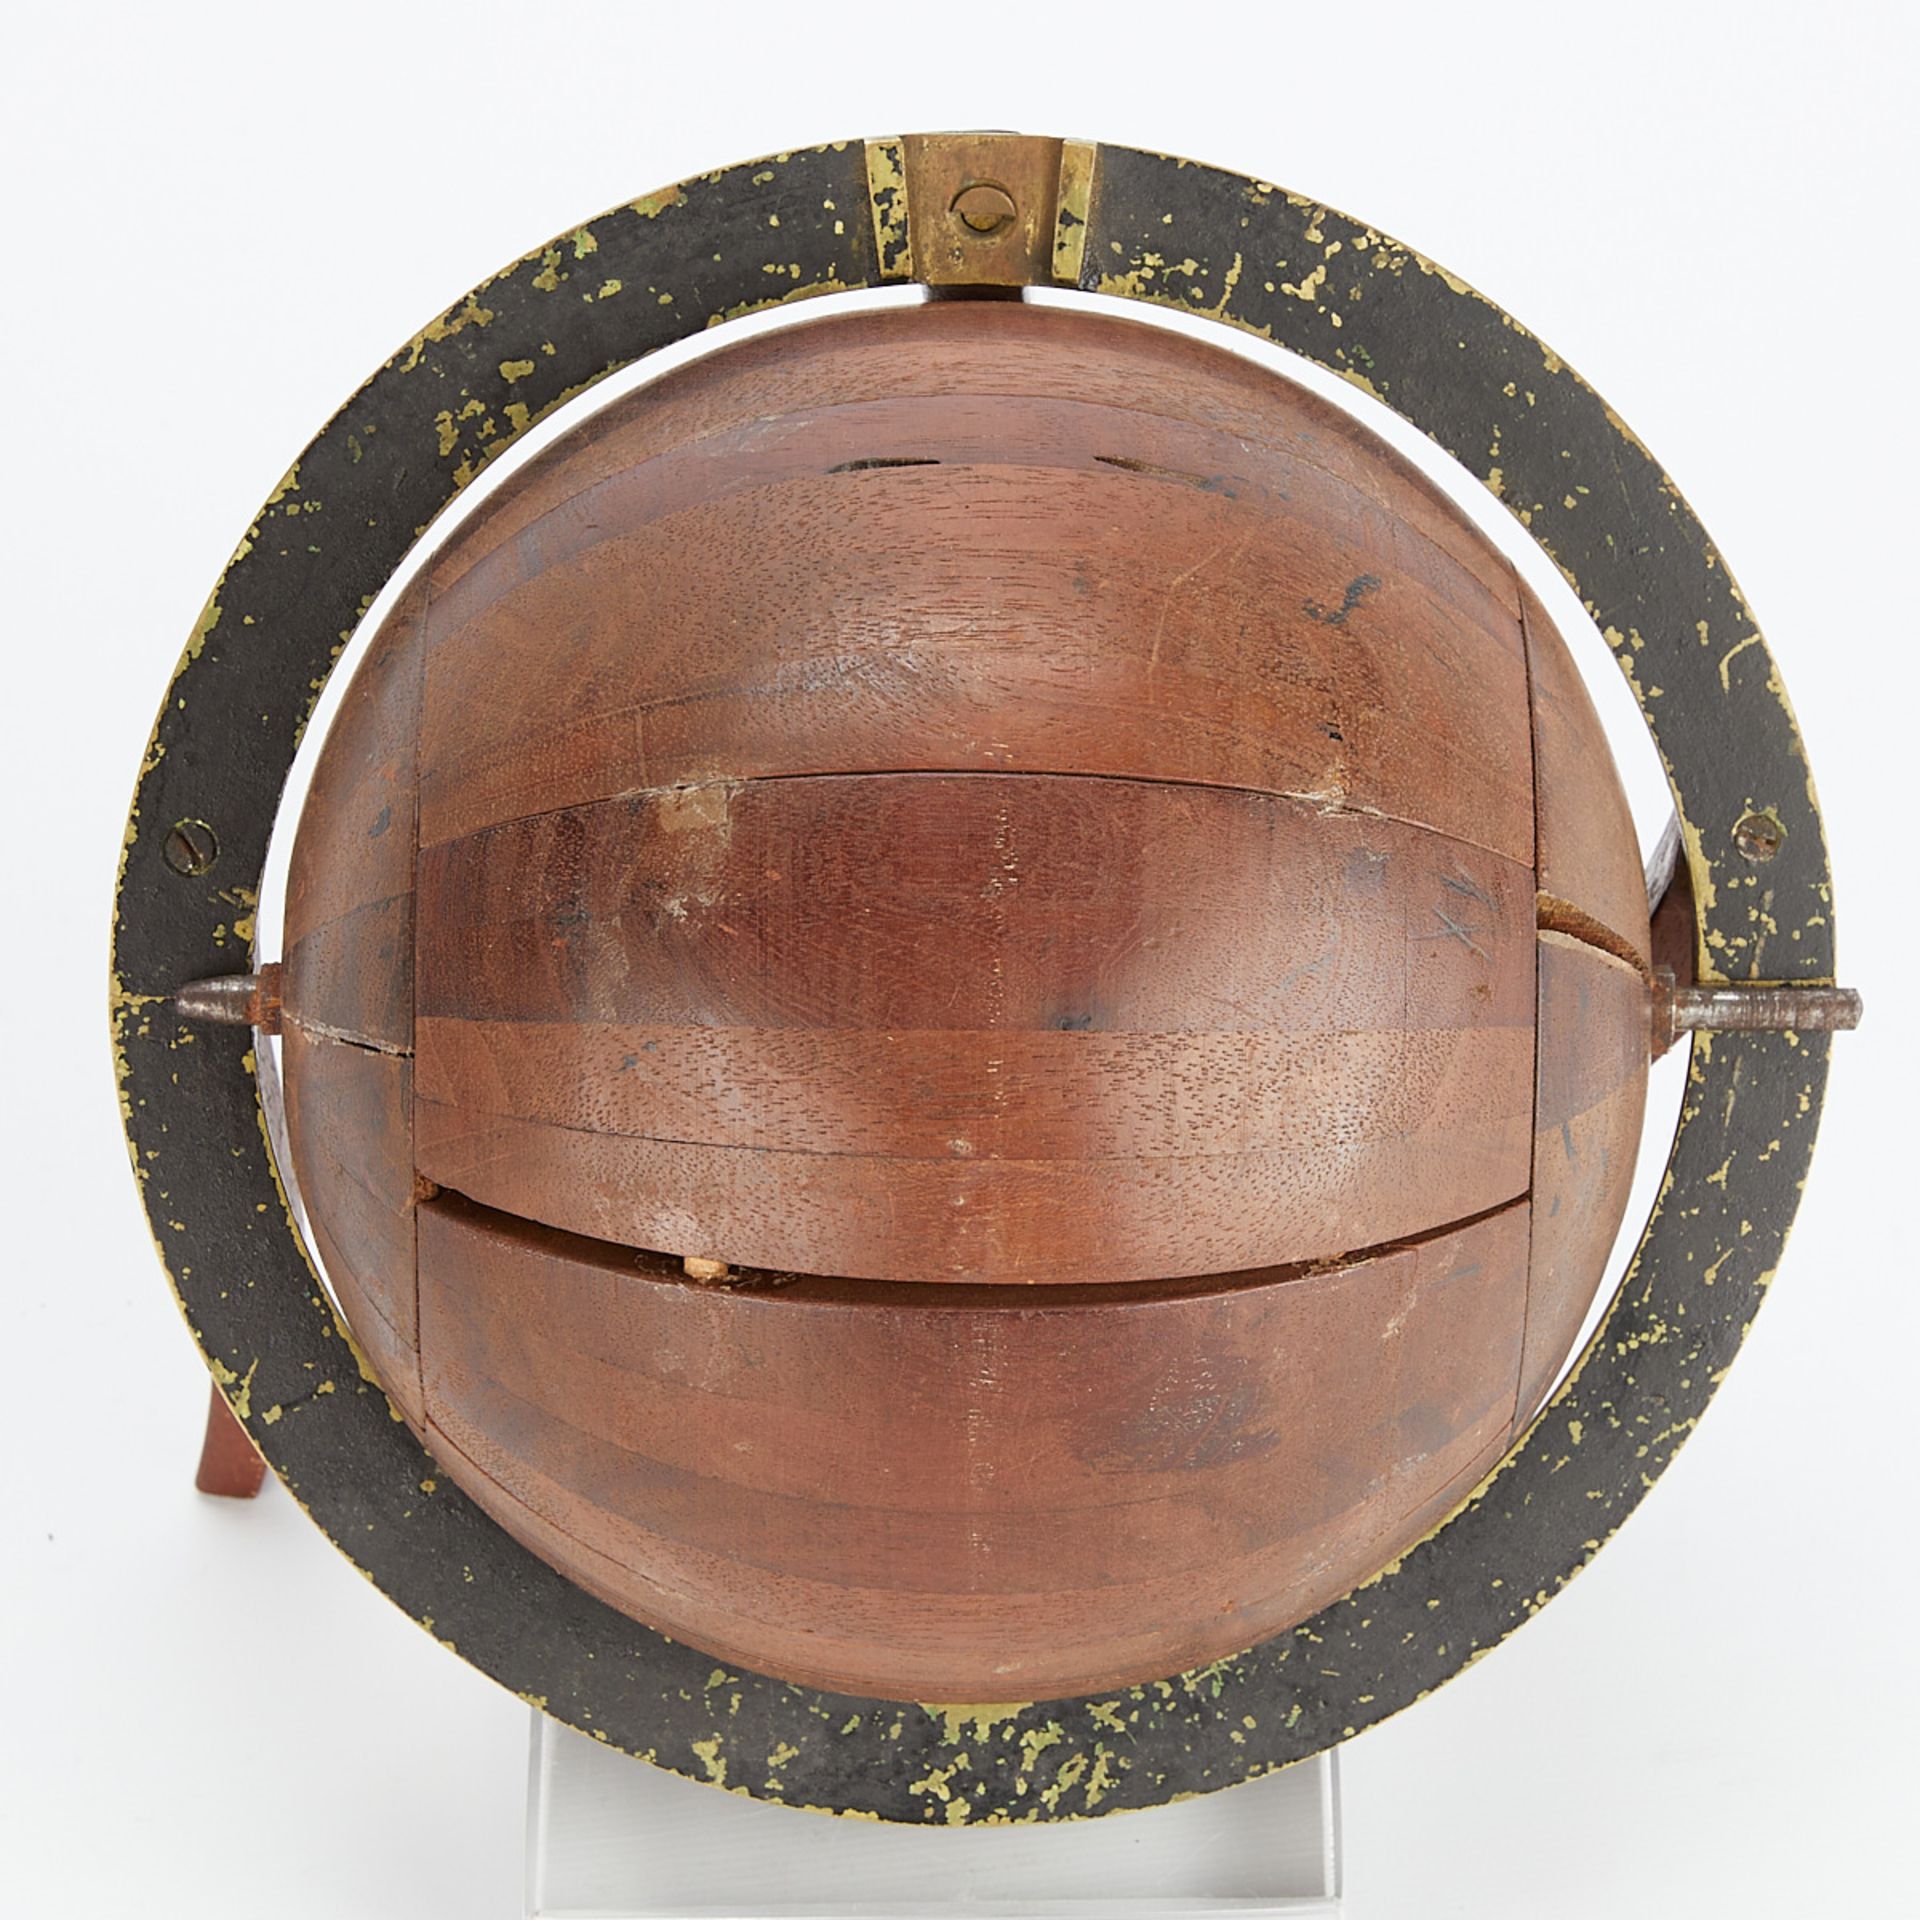 Vintage Wooden Sphere or Globe with Case - Image 13 of 15